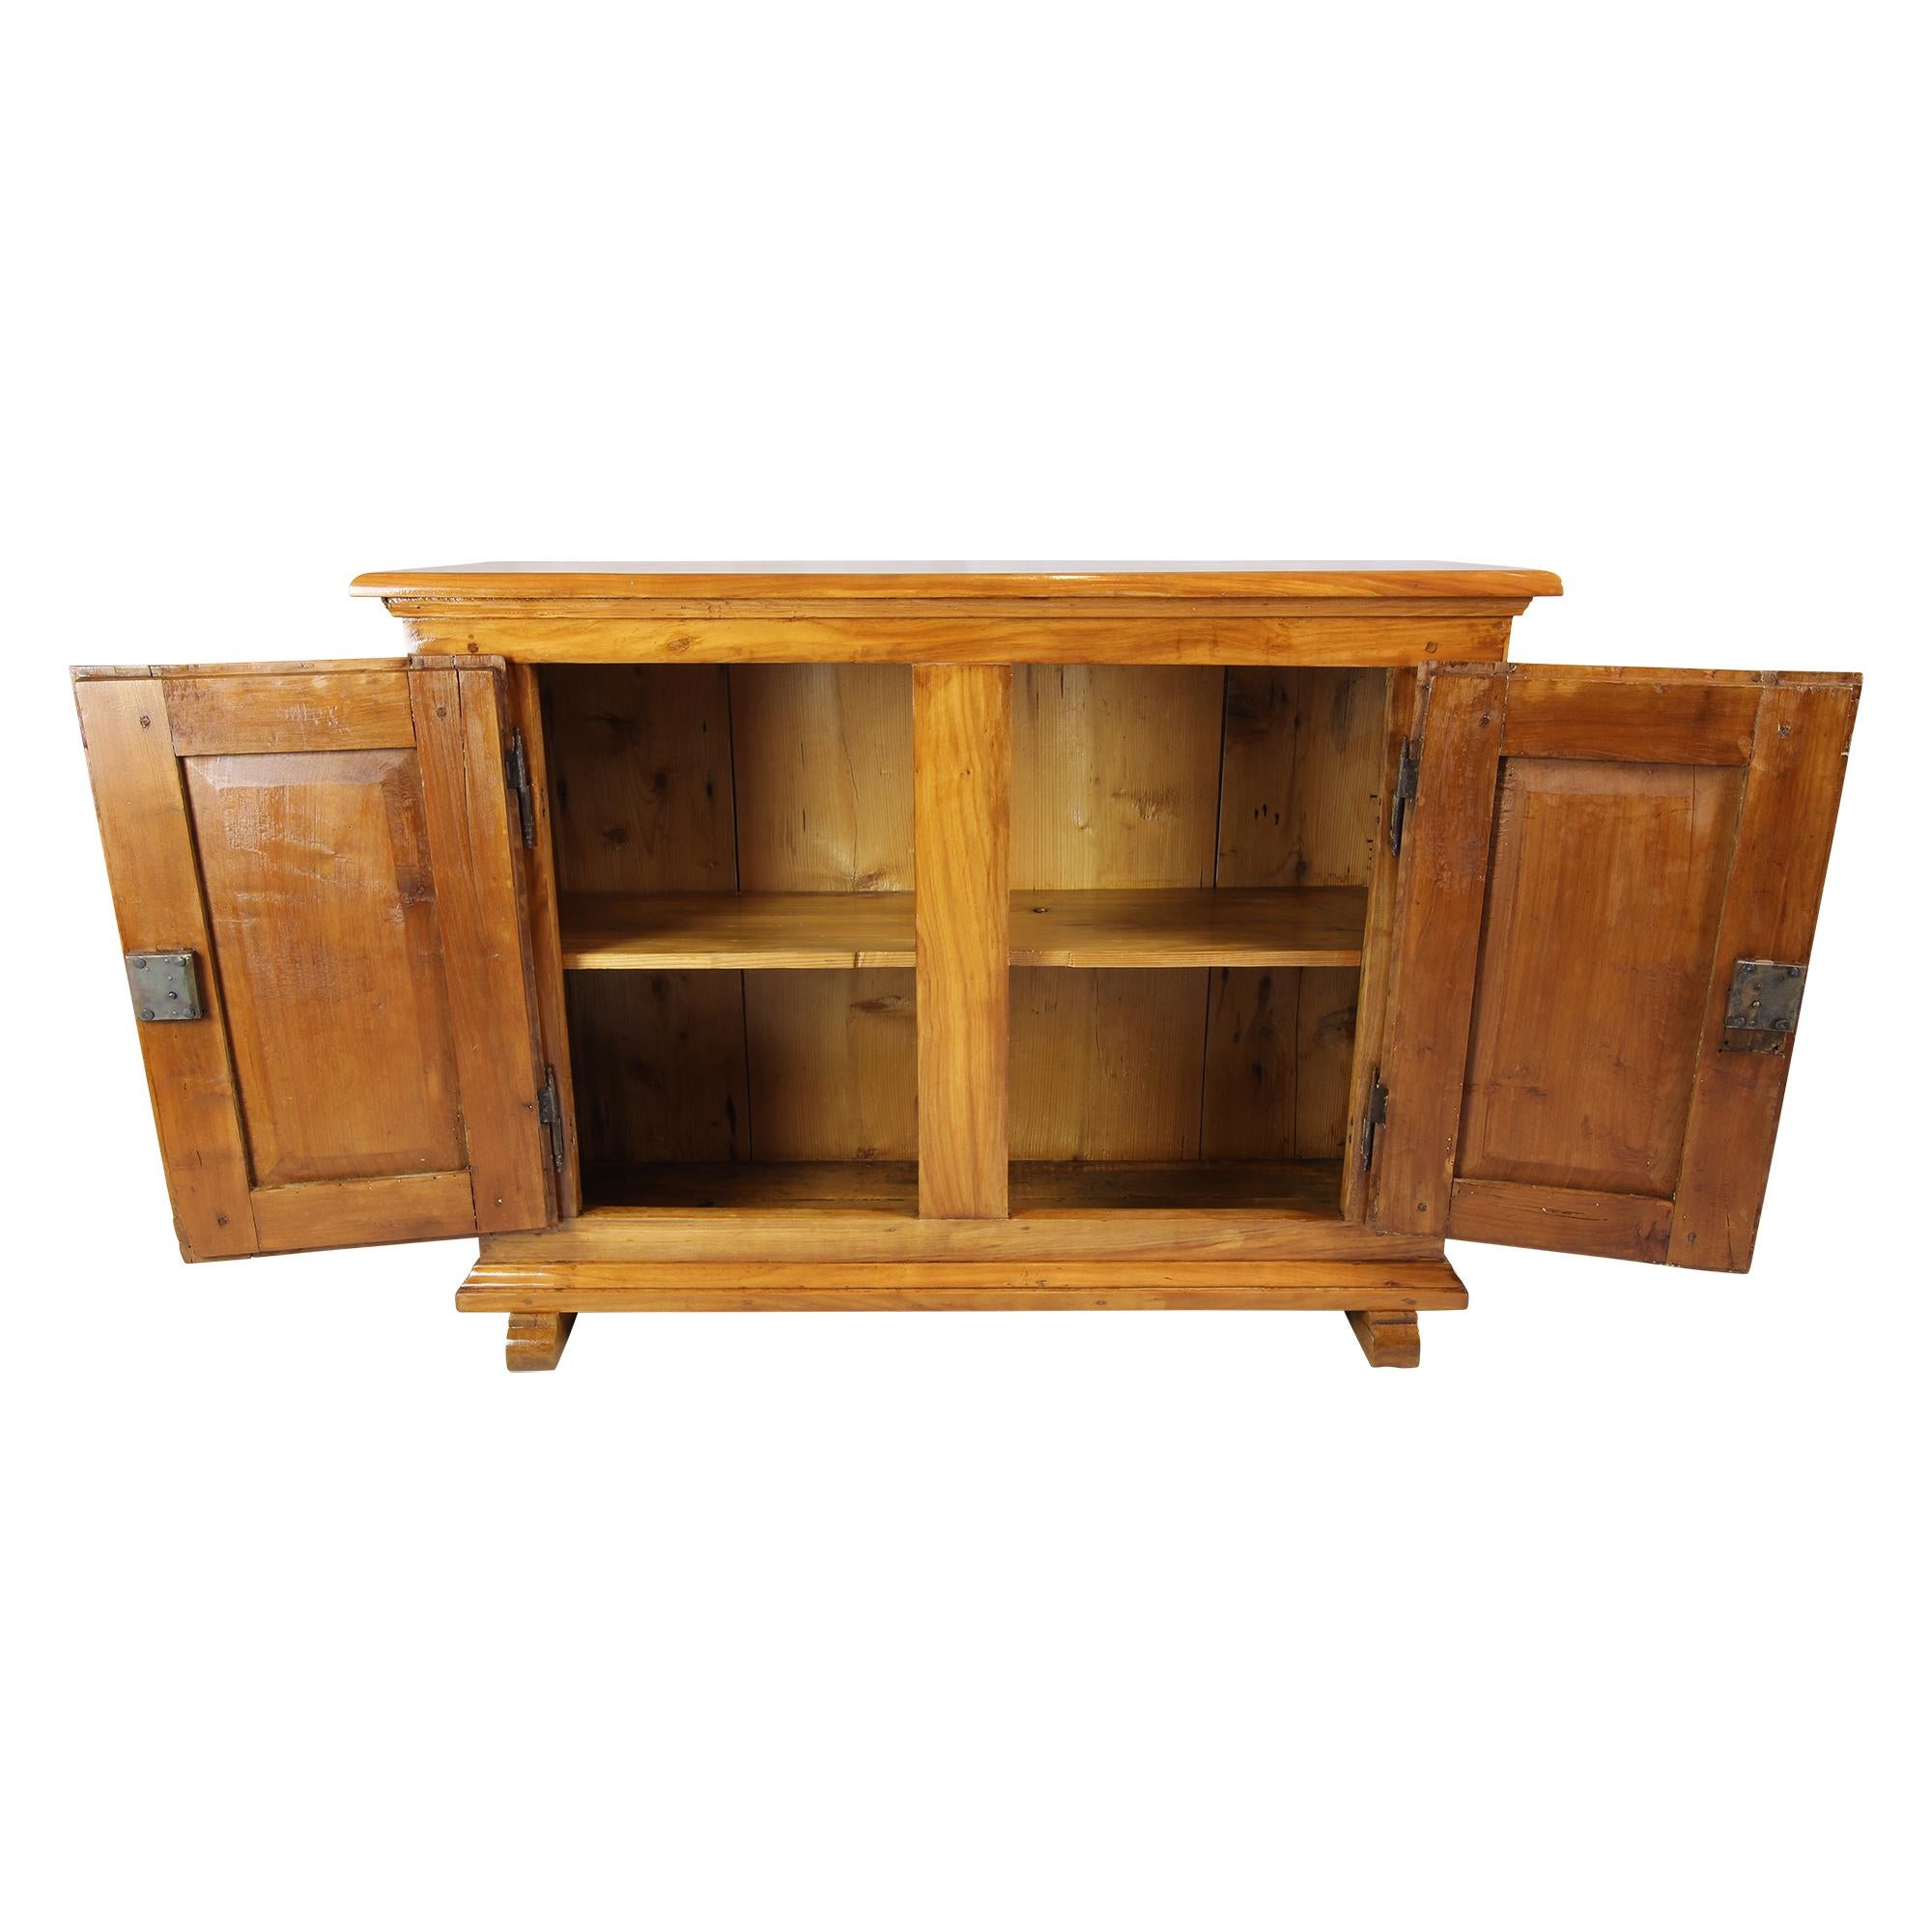 The small sideboard made of solid cherry comes from the South of Germany. The sideboard has a very practical small rare measure. It comes from the Biedermeier period around 1825.